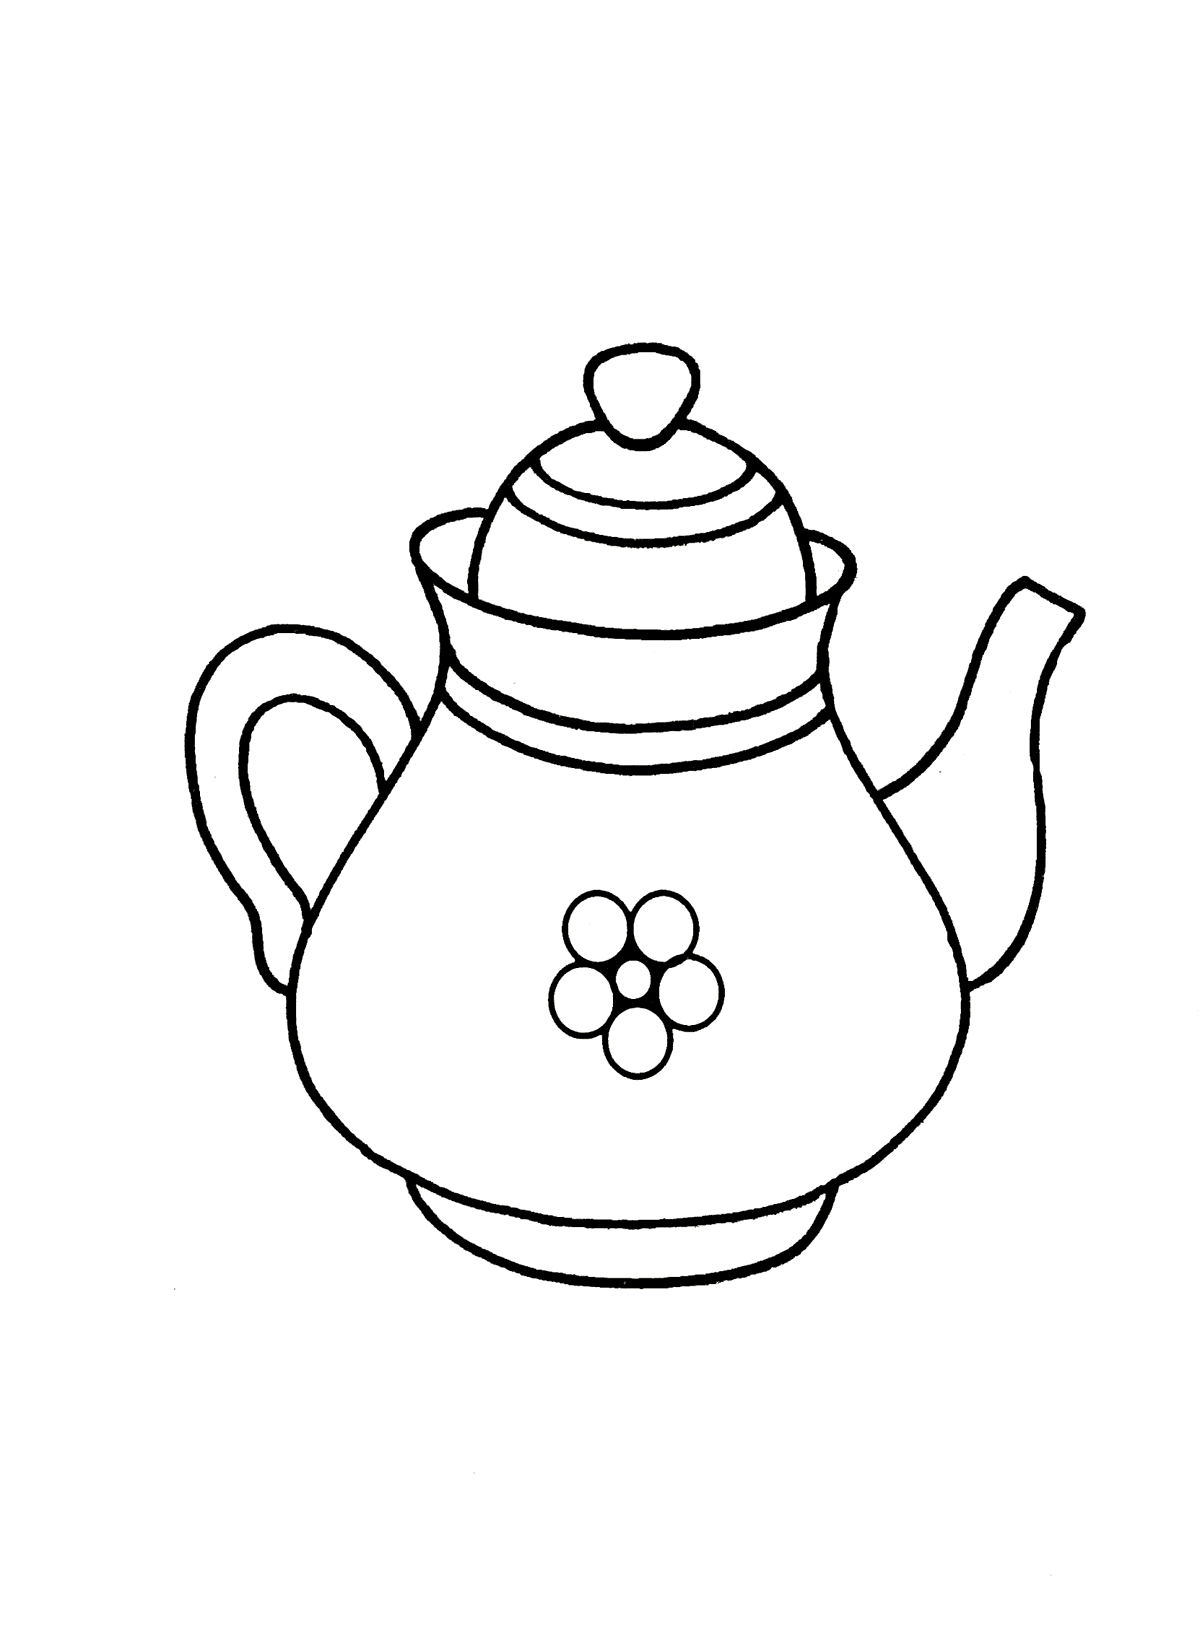 Coloring page - Teapot